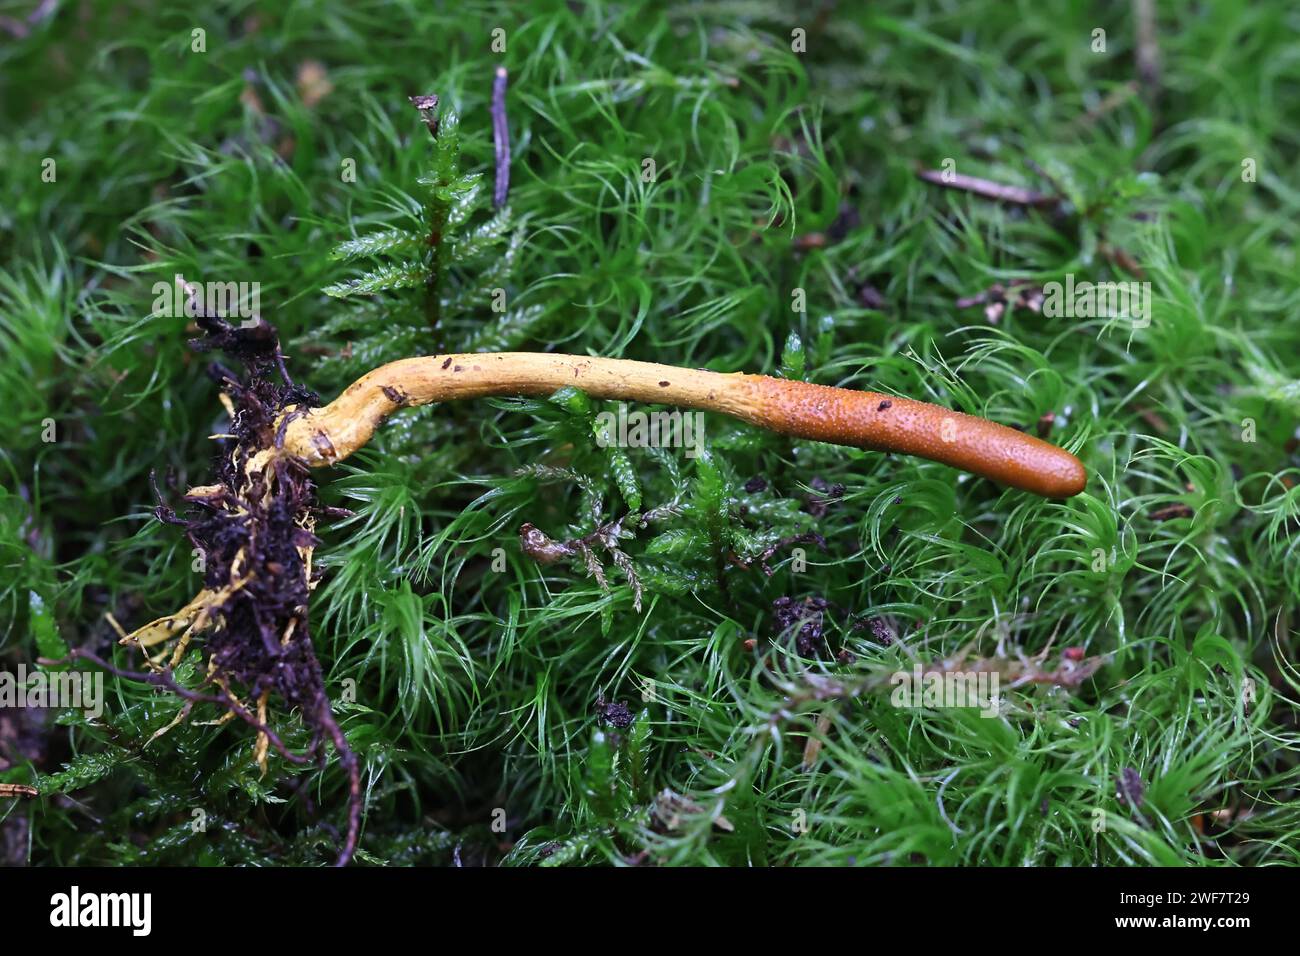 Tolypocladium ophioglossoides, known as the snake's tongue, golden thread cordyceps or snaketongue truffleclub, wild medicinal fungus from Finland Stock Photo